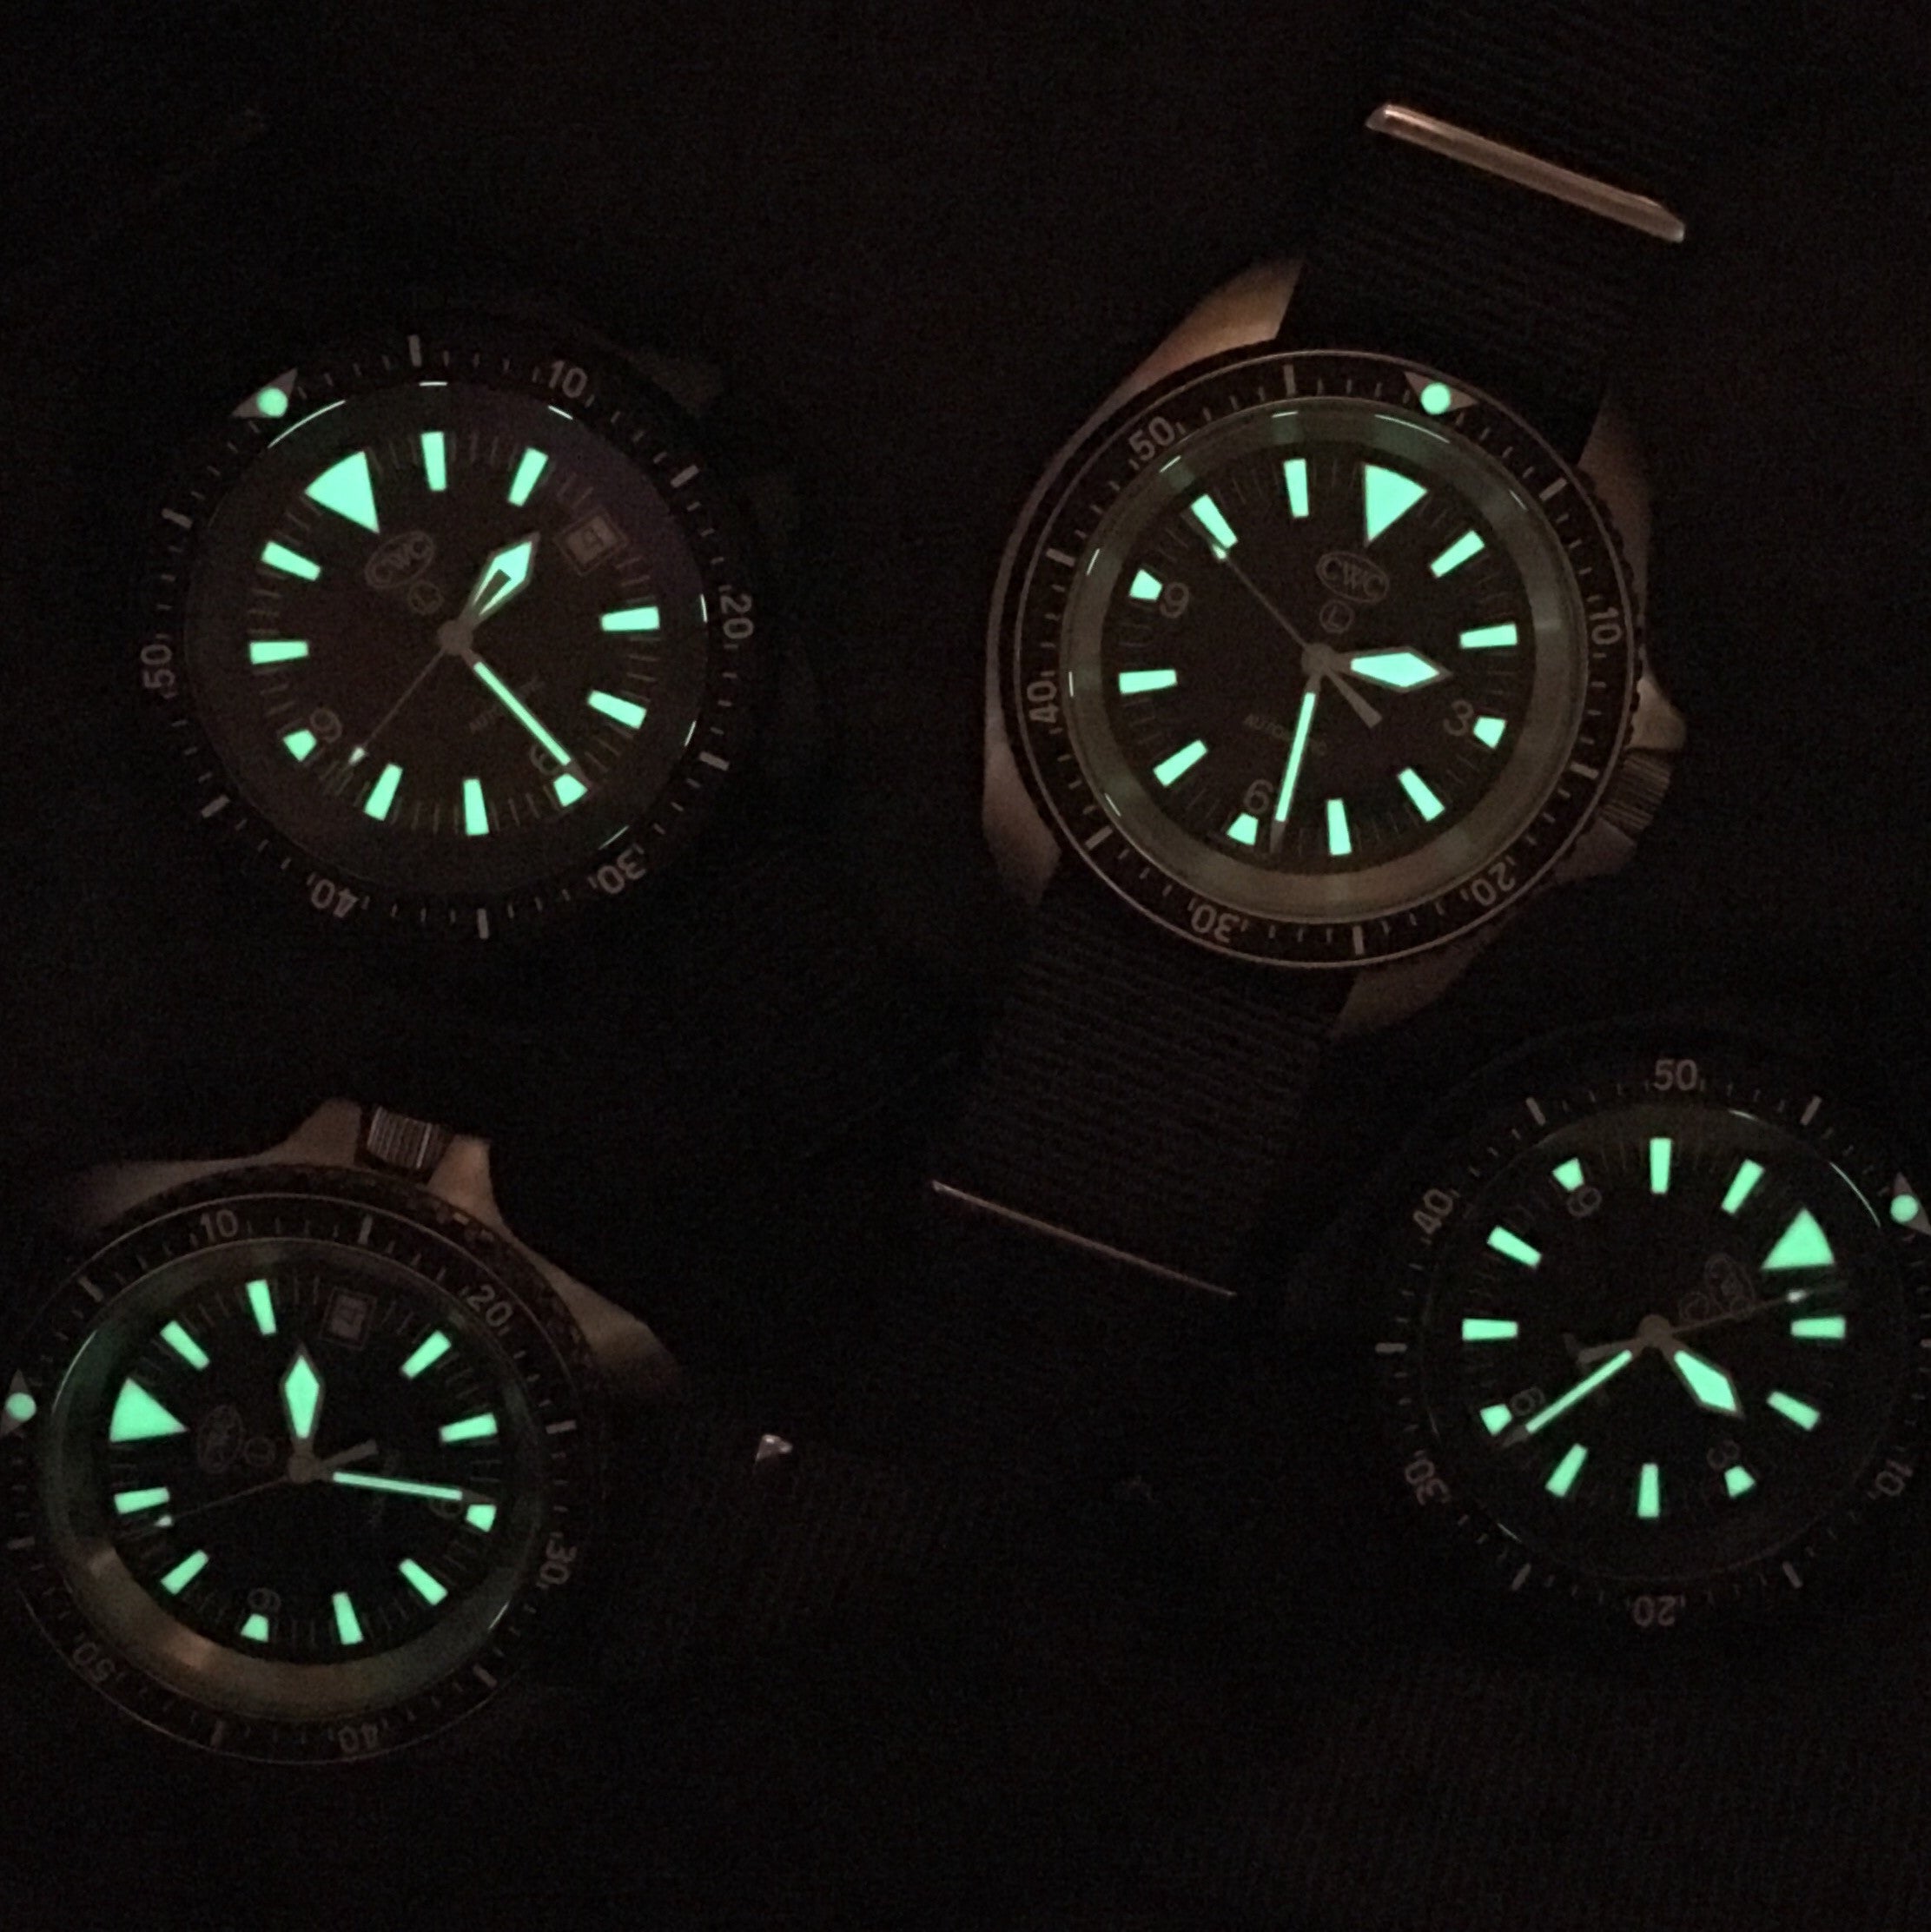 DIVERS WATCHES - GLOWING